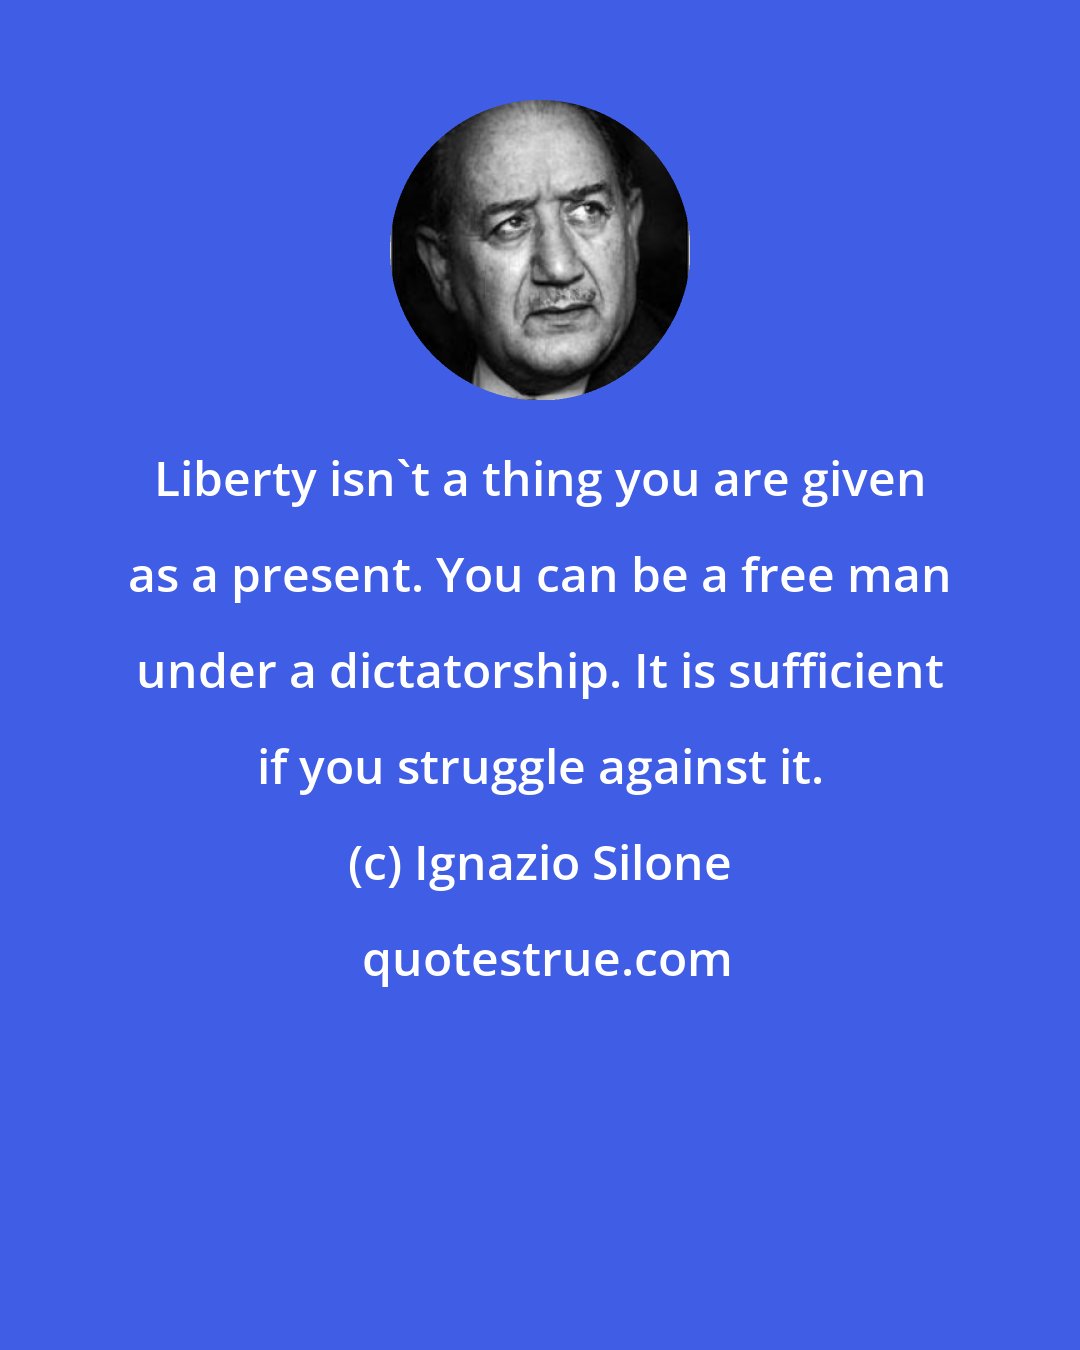 Ignazio Silone: Liberty isn't a thing you are given as a present. You can be a free man under a dictatorship. It is sufficient if you struggle against it.